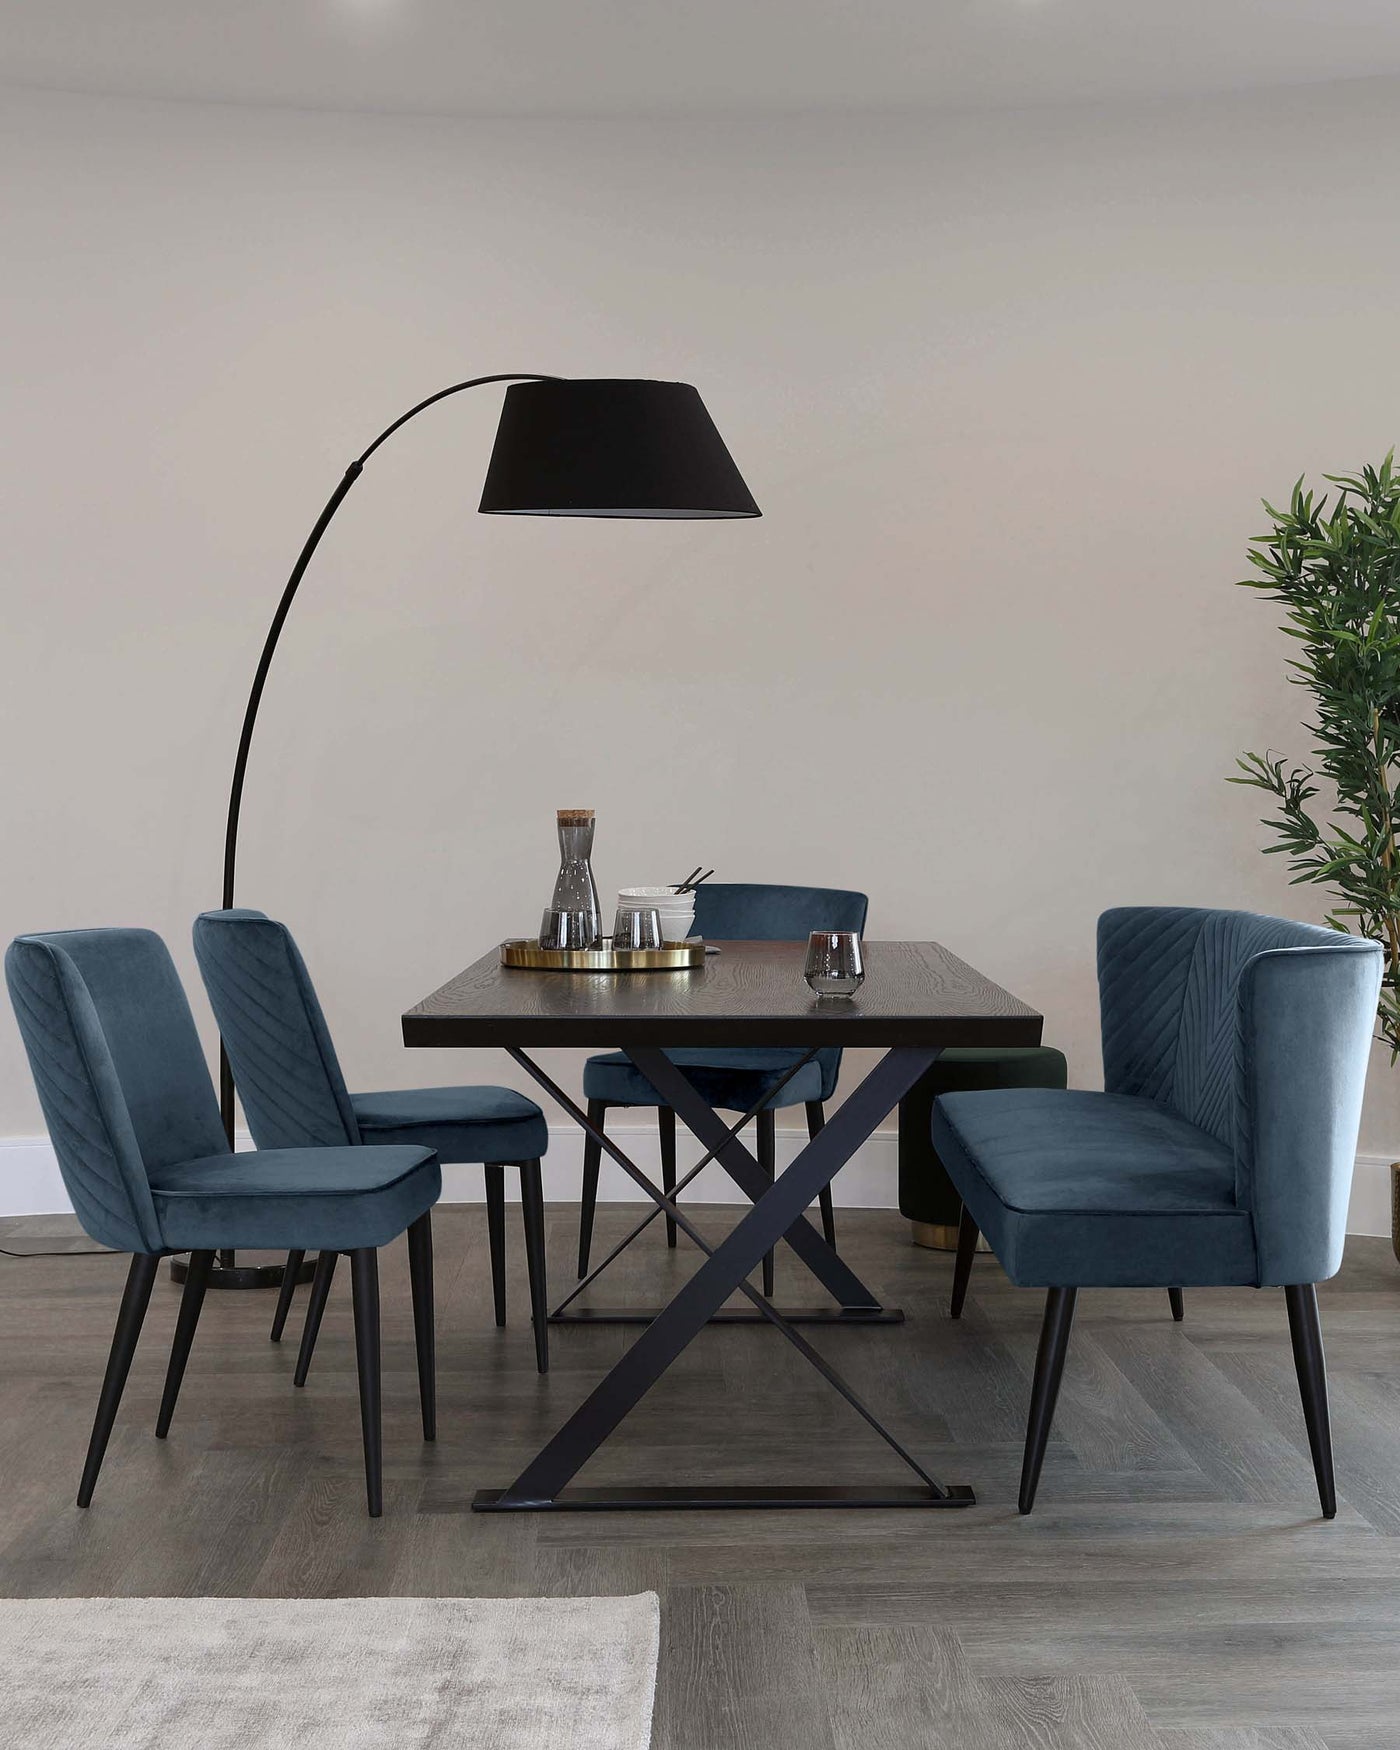 A modern dining room setting featuring a dark wooden rectangular table with an X-shaped metallic base. Around the table are four plush, blue velvet dining chairs with backrest quilting and slim, black metal legs. An overhanging floor lamp with a large, black shade creates a focused lighting effect over the table. A small green plant in a pot adds a touch of nature to the scene.